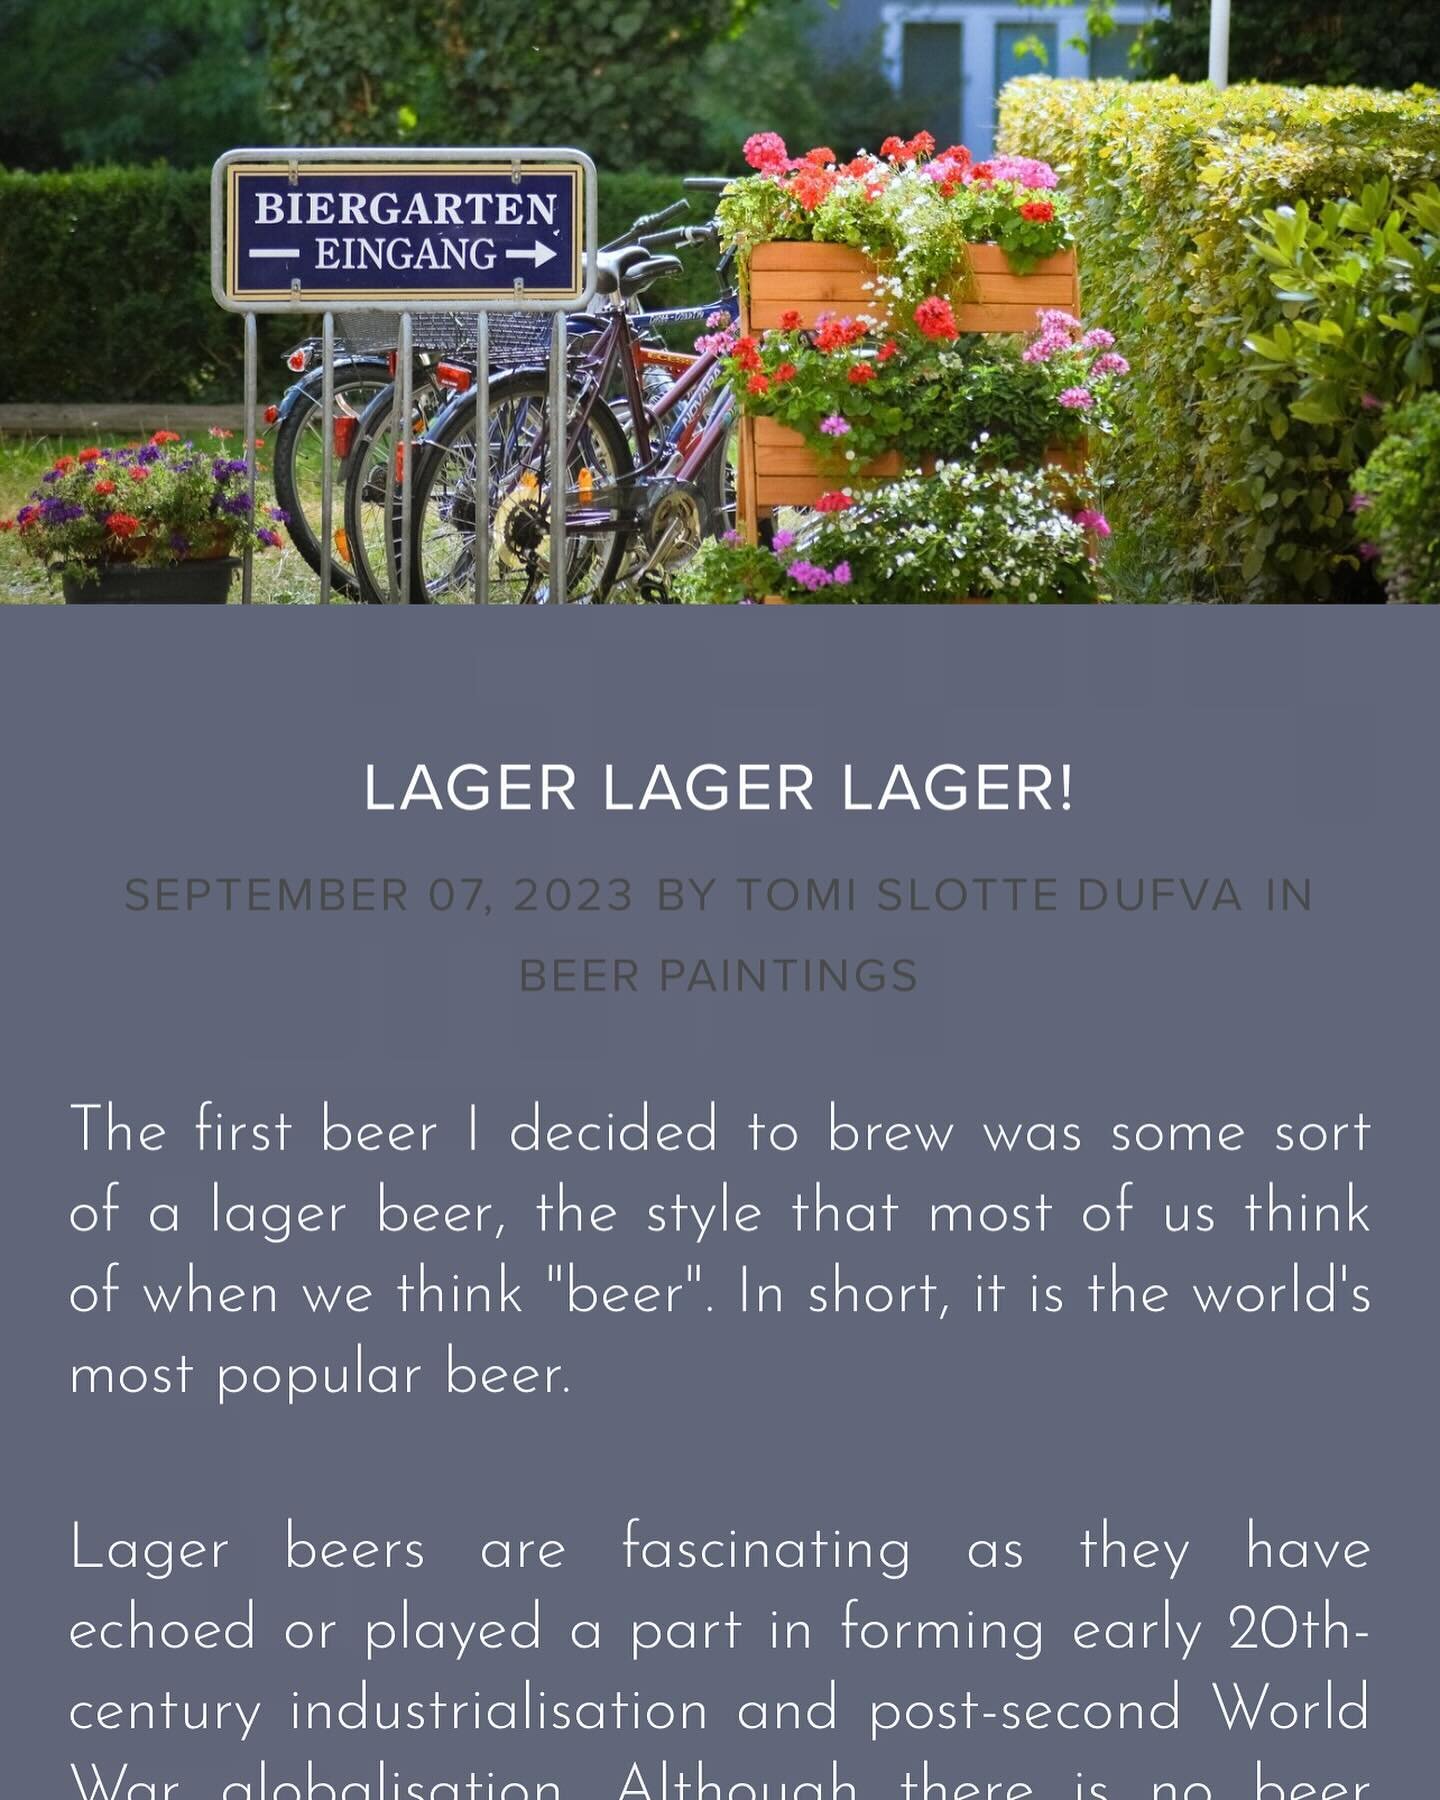 Wrote a bit about lager: https://www.thispagehassomeissues.com/blog/2023/9/7/lager-lager-lager